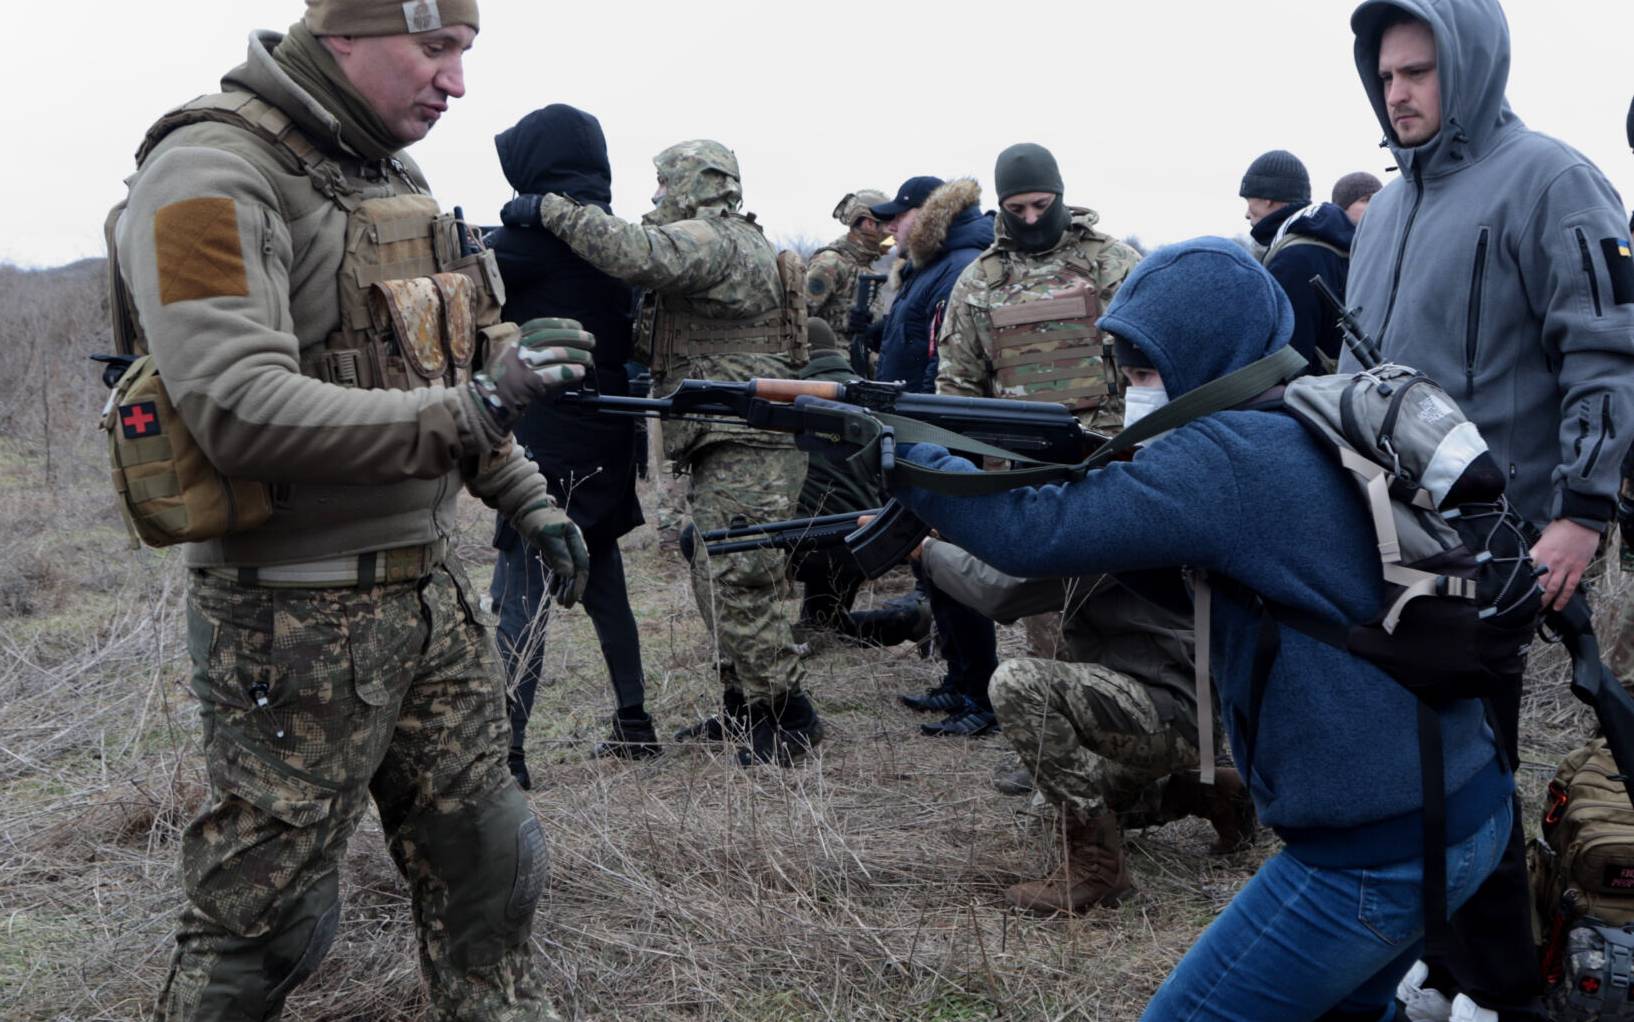 A military instructor teaches civilians during a training session outside Black See Ukrainian city of Odessa on February 5, 2022. - The Odessa Defense Headquarters conducted extensive training to teach the population to defend themselves in the event of an invasion by Russian troops. (Photo by Oleksandr GIMANOV / AFP)